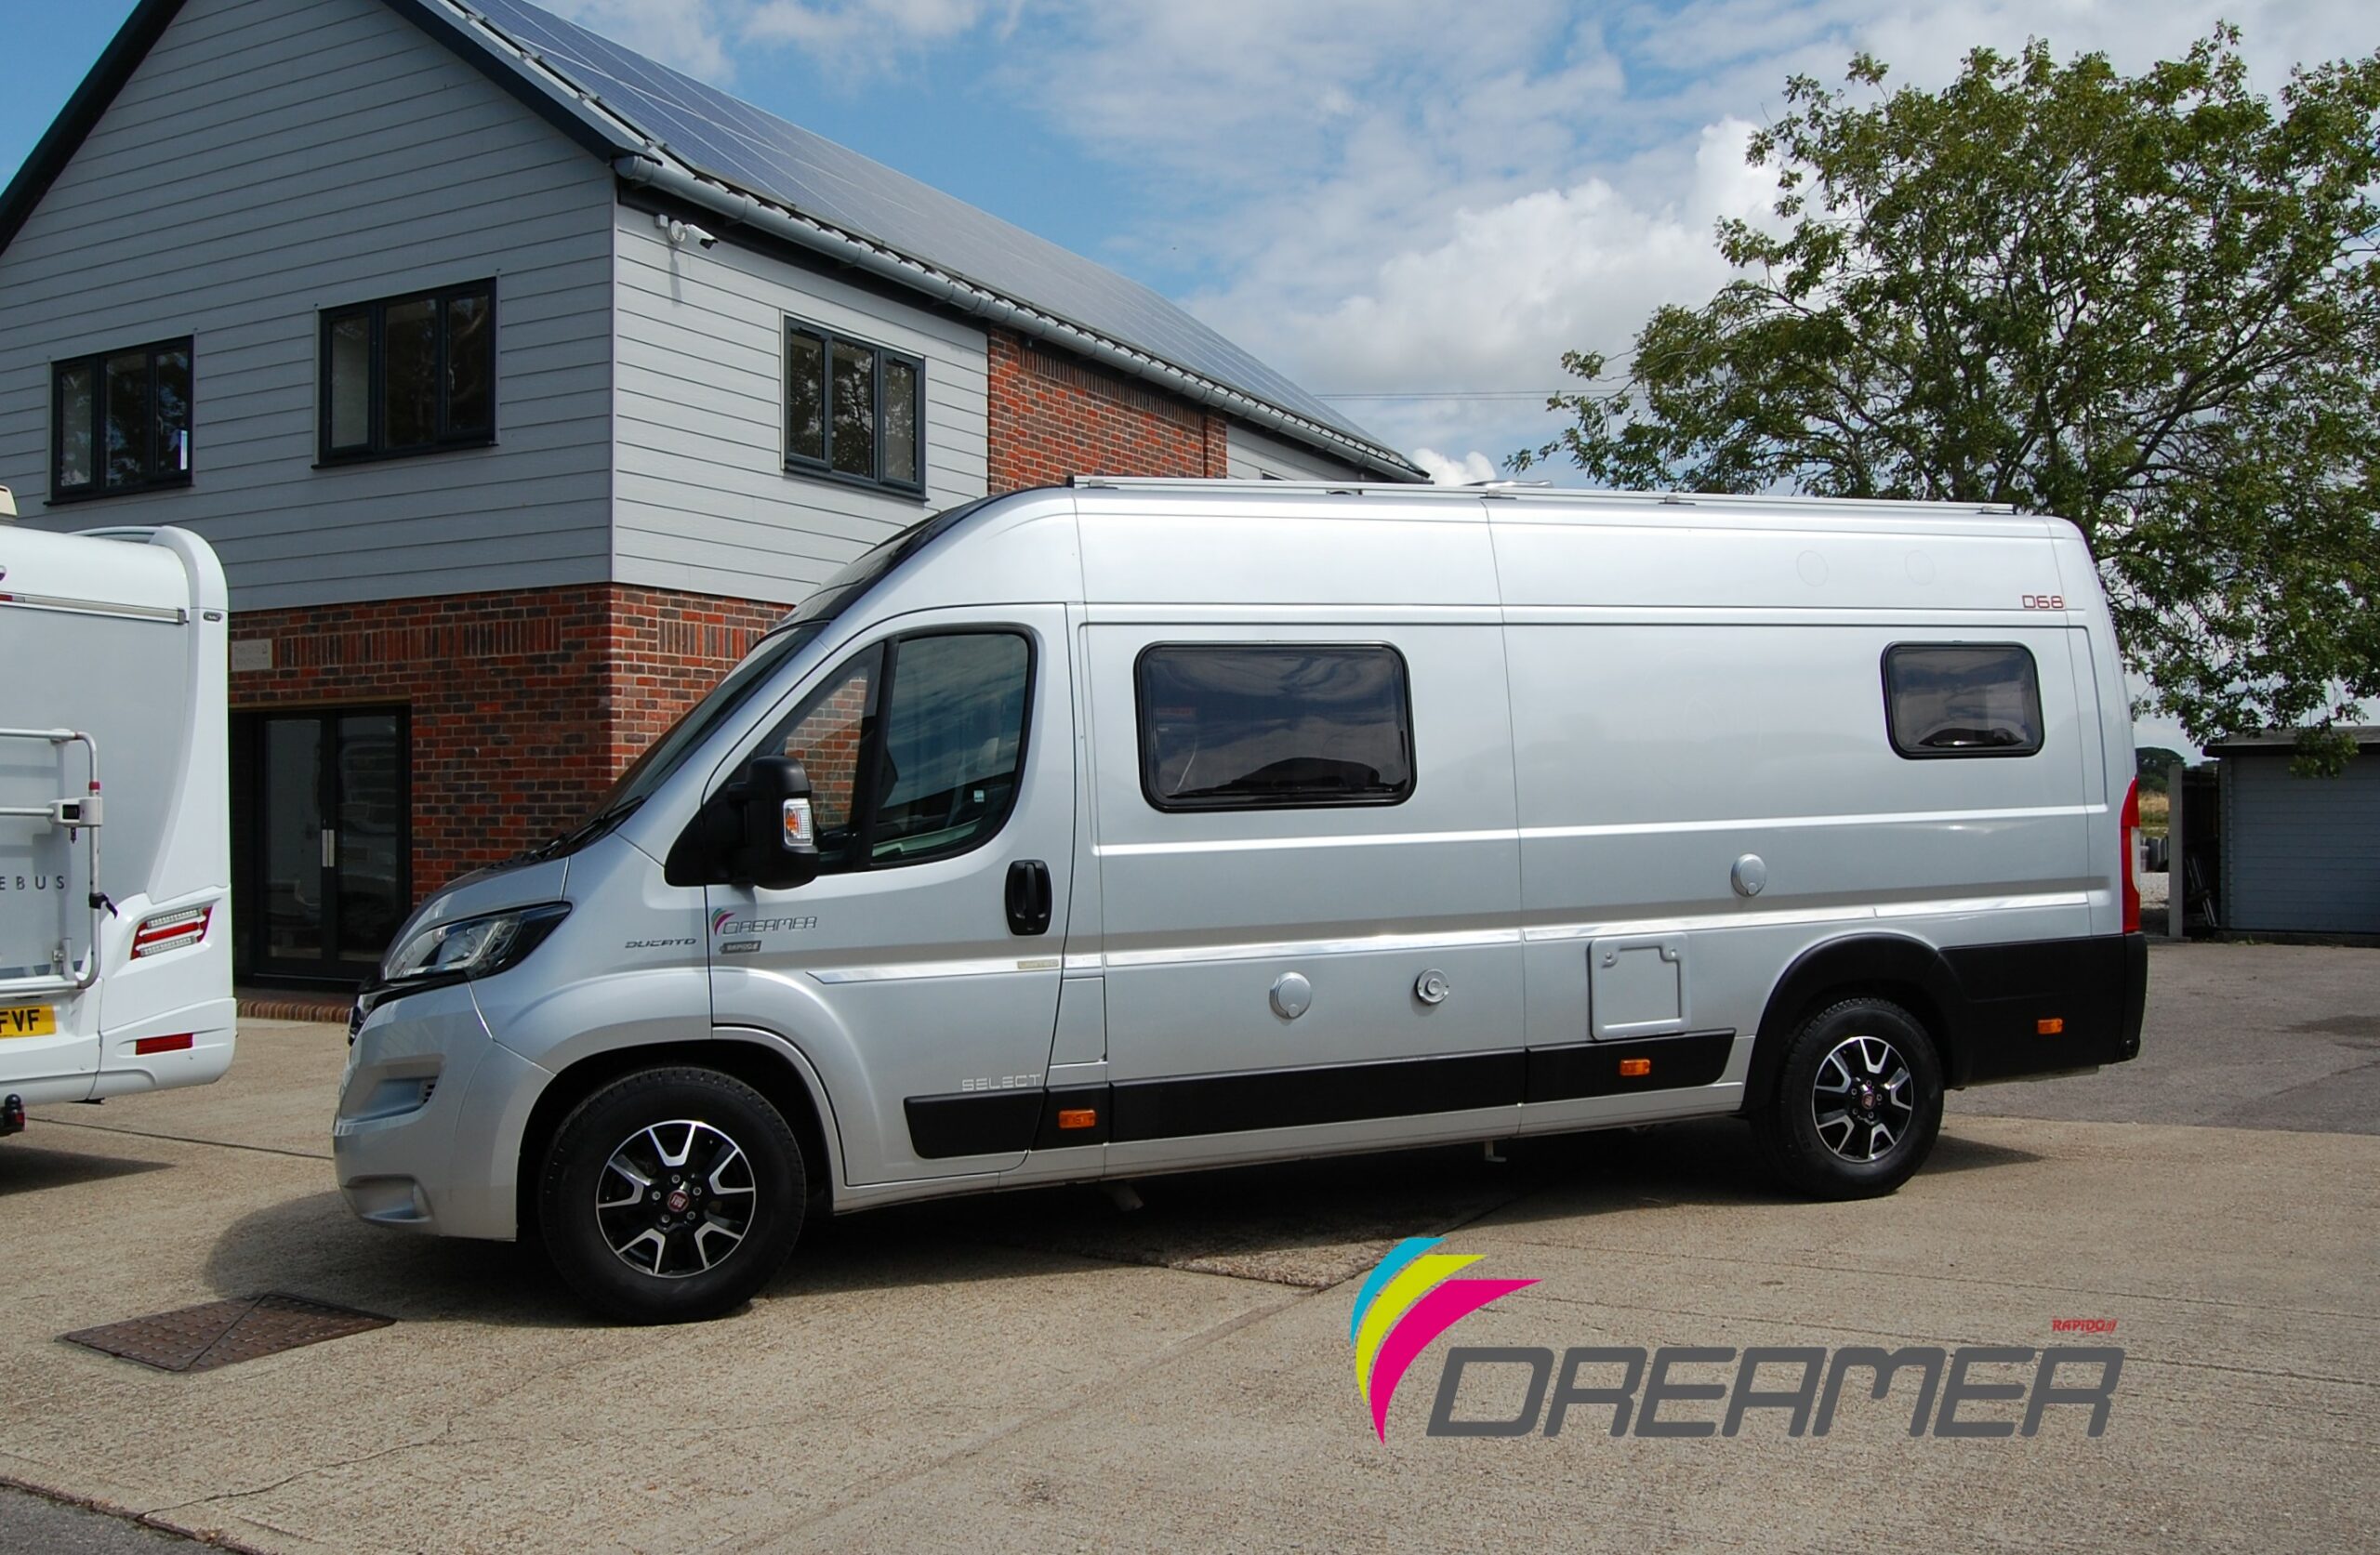 SOLD*** 2021 Dreamer D68 Limited Motorhome, Silver Metallic, Rear Twin  Single Beds, 9G-Automatic 140Hp. Highly Spec'd & Available for immediate  delivery! - Harbour Creek Motorhomes - Your South Coast Westfalia Dealer